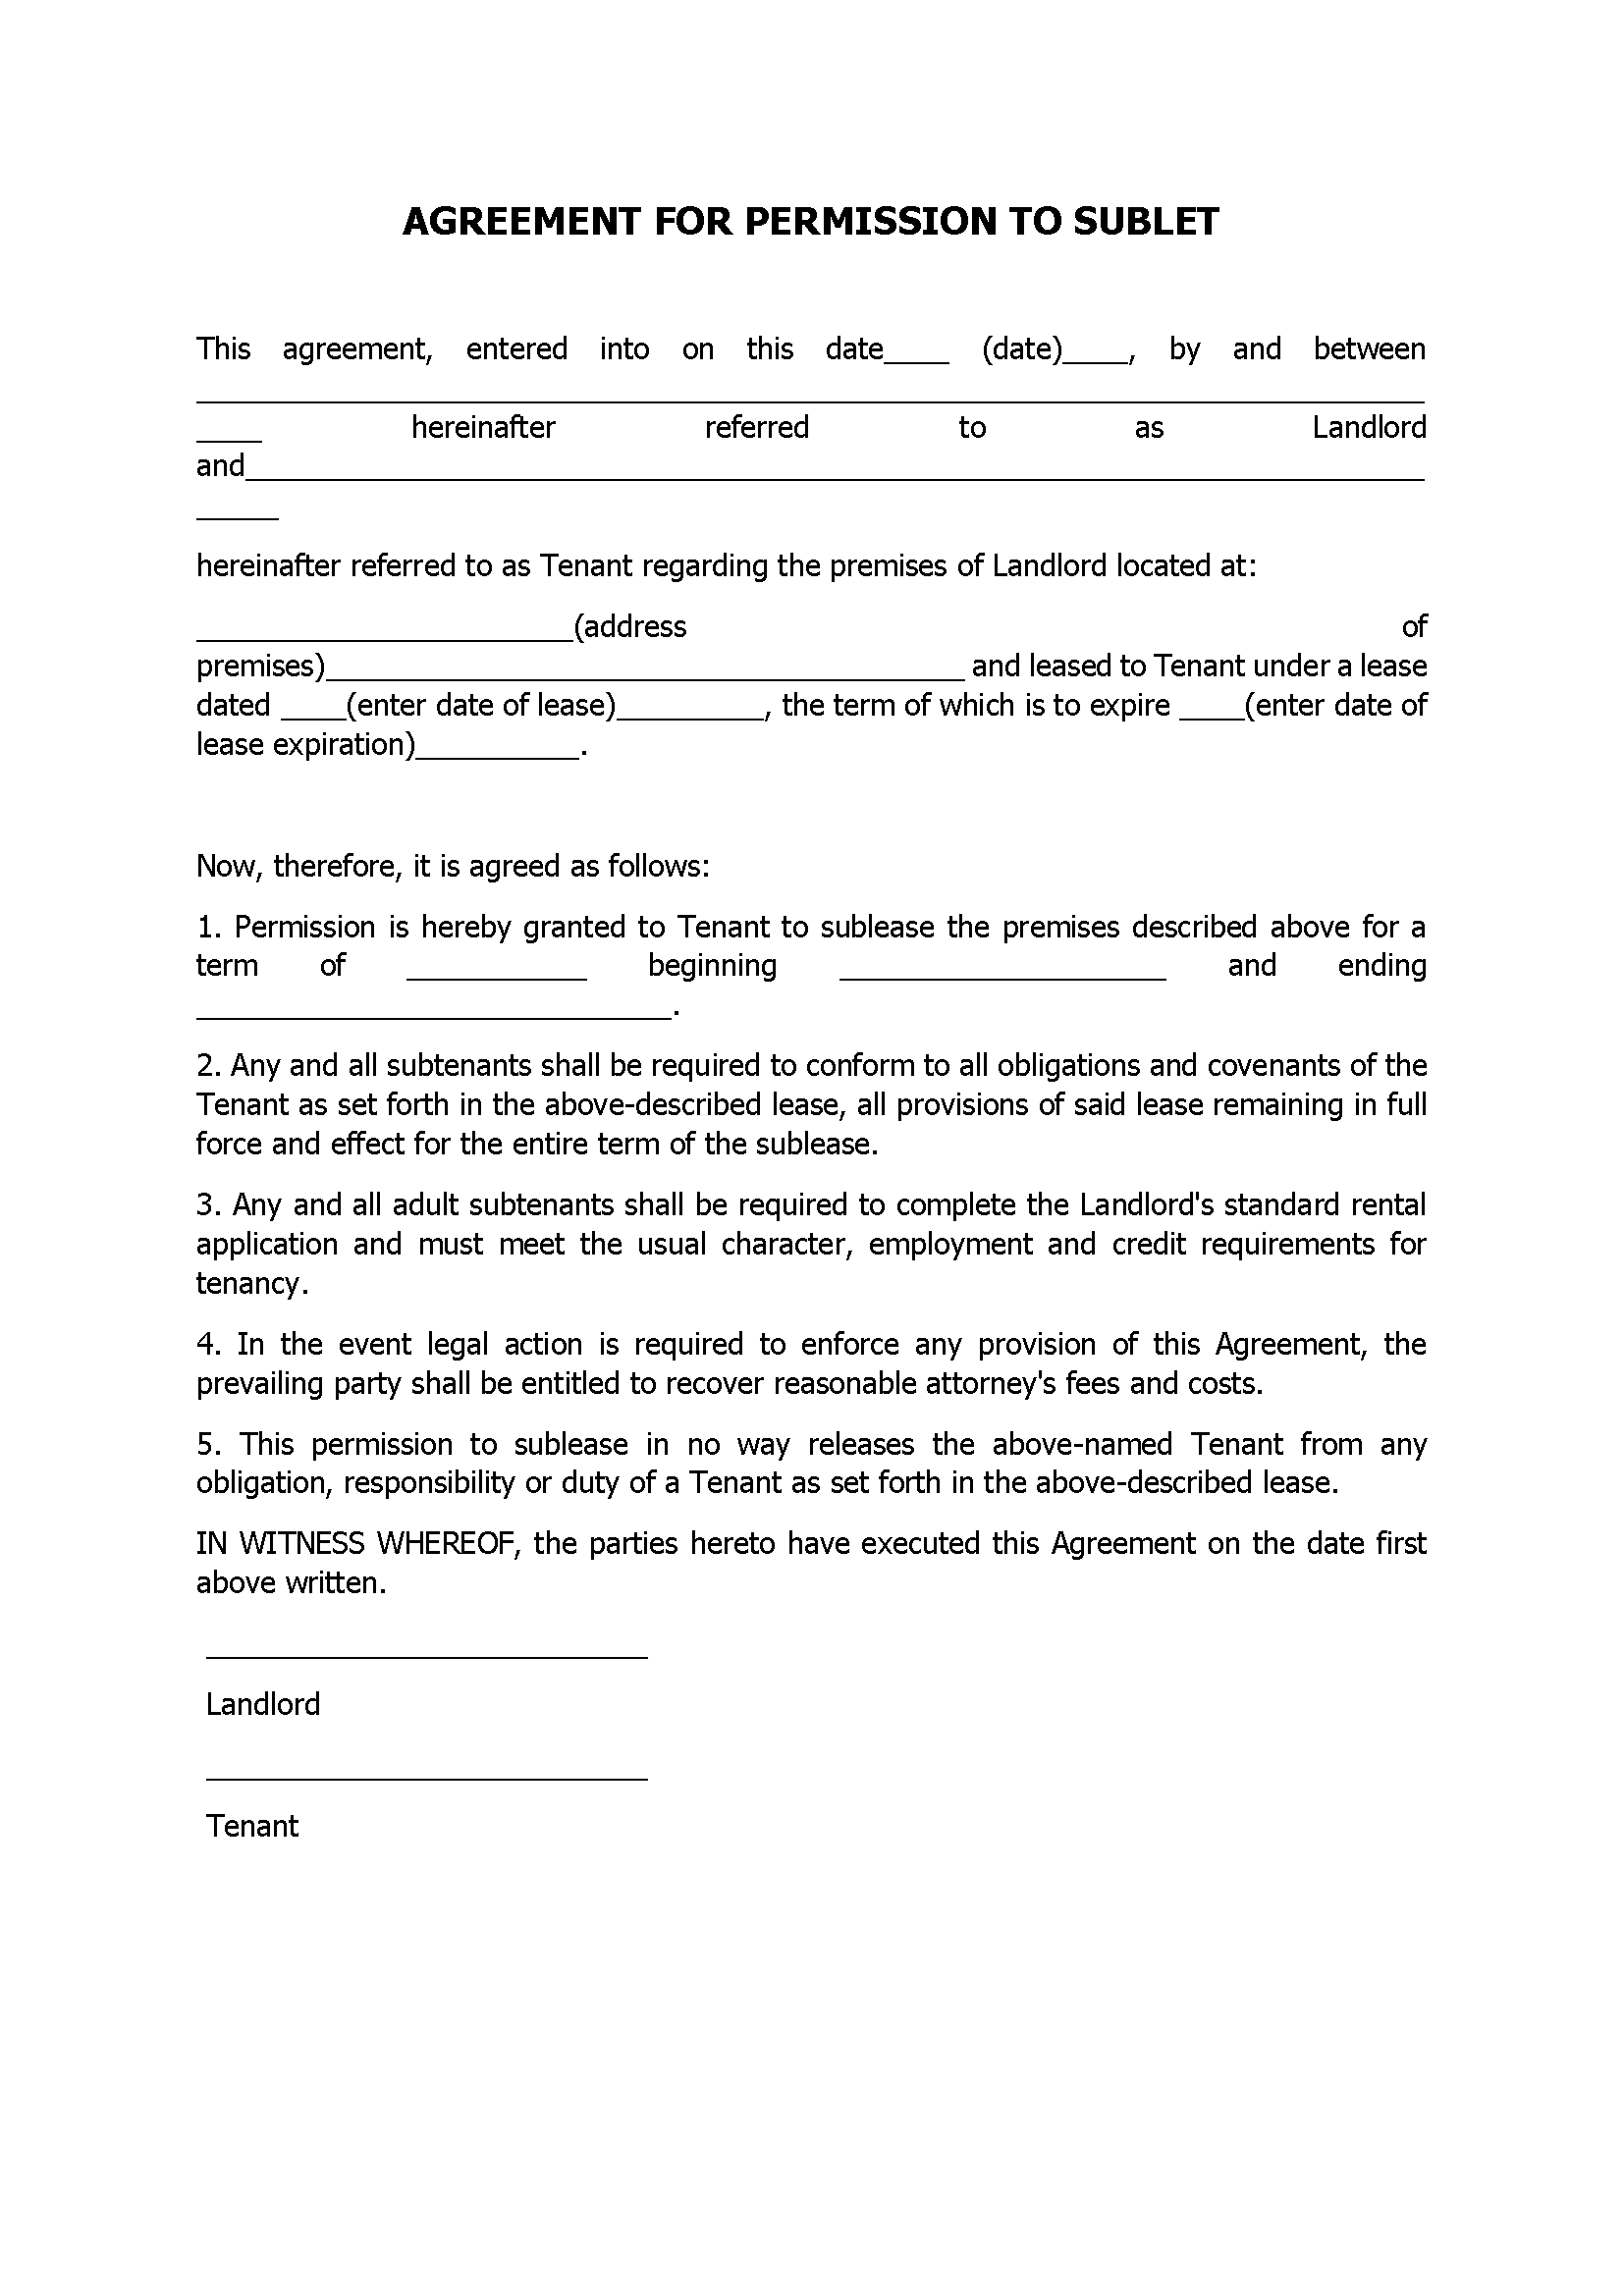 Agreement For Permission To Sublet